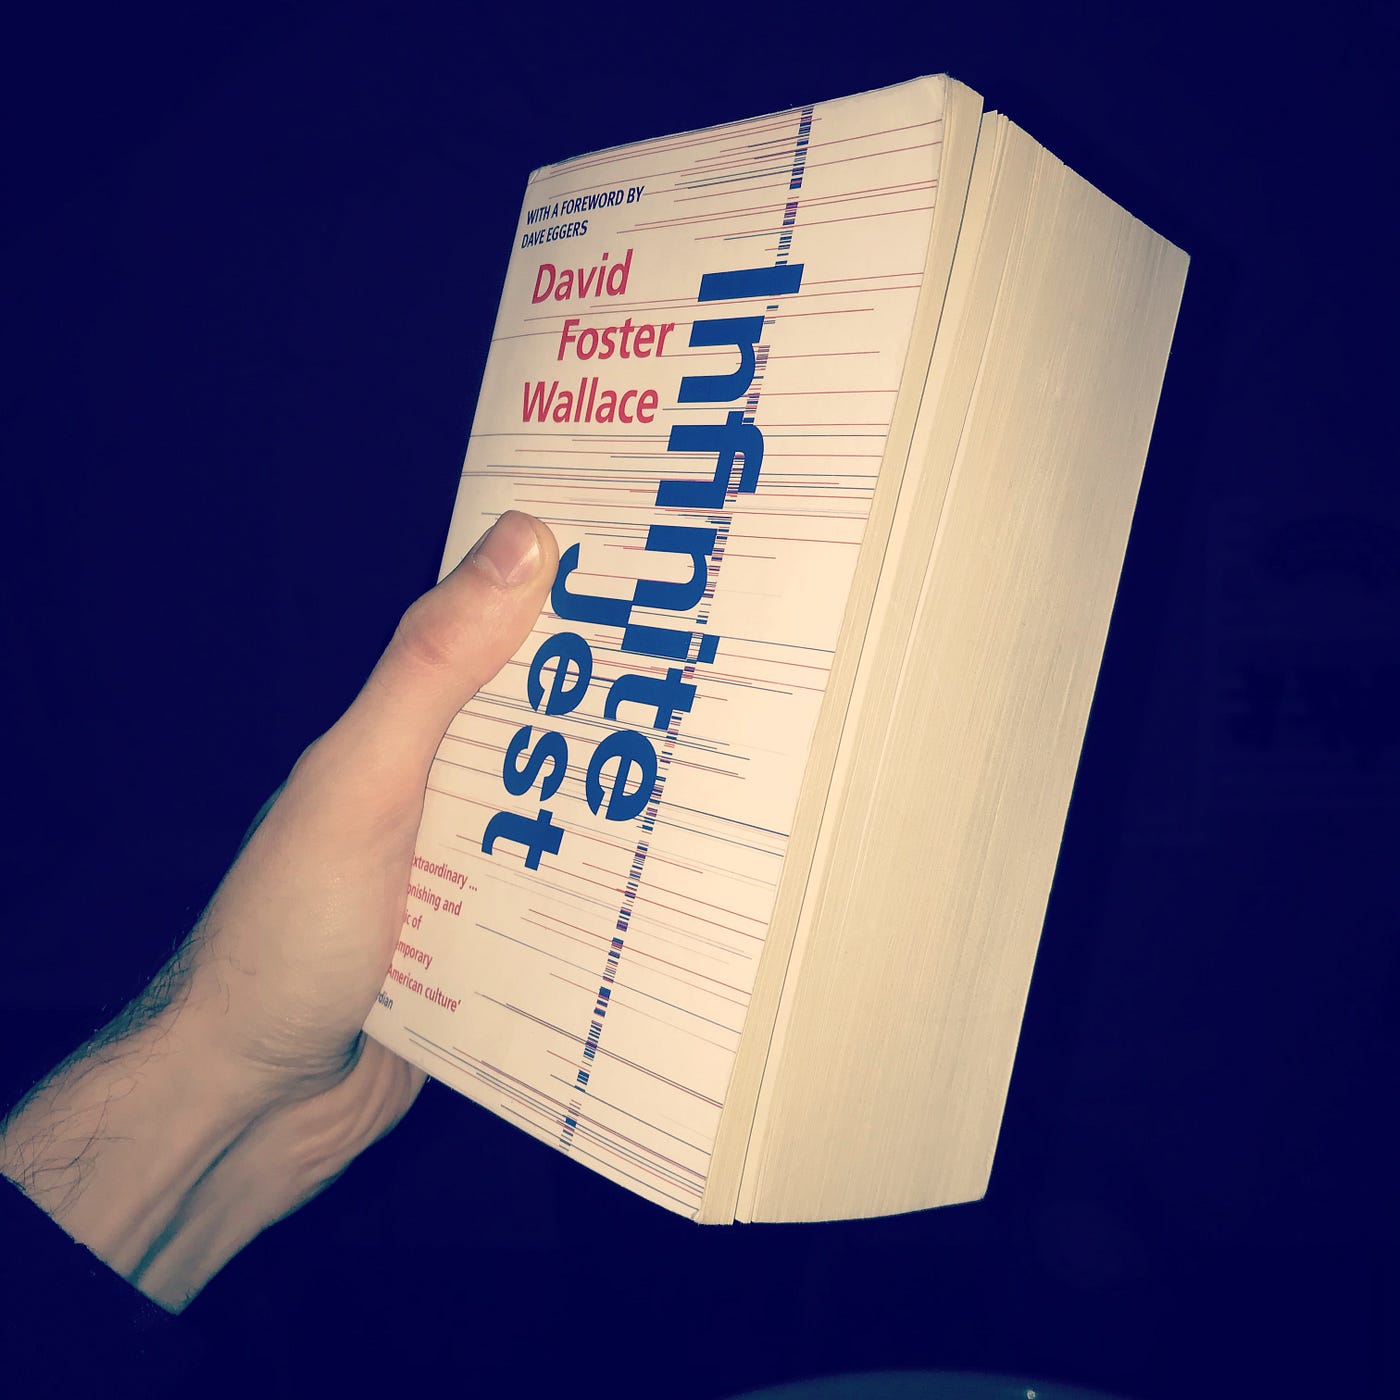 Some people have read Infinite Jest, by Tomas Ramanauskas